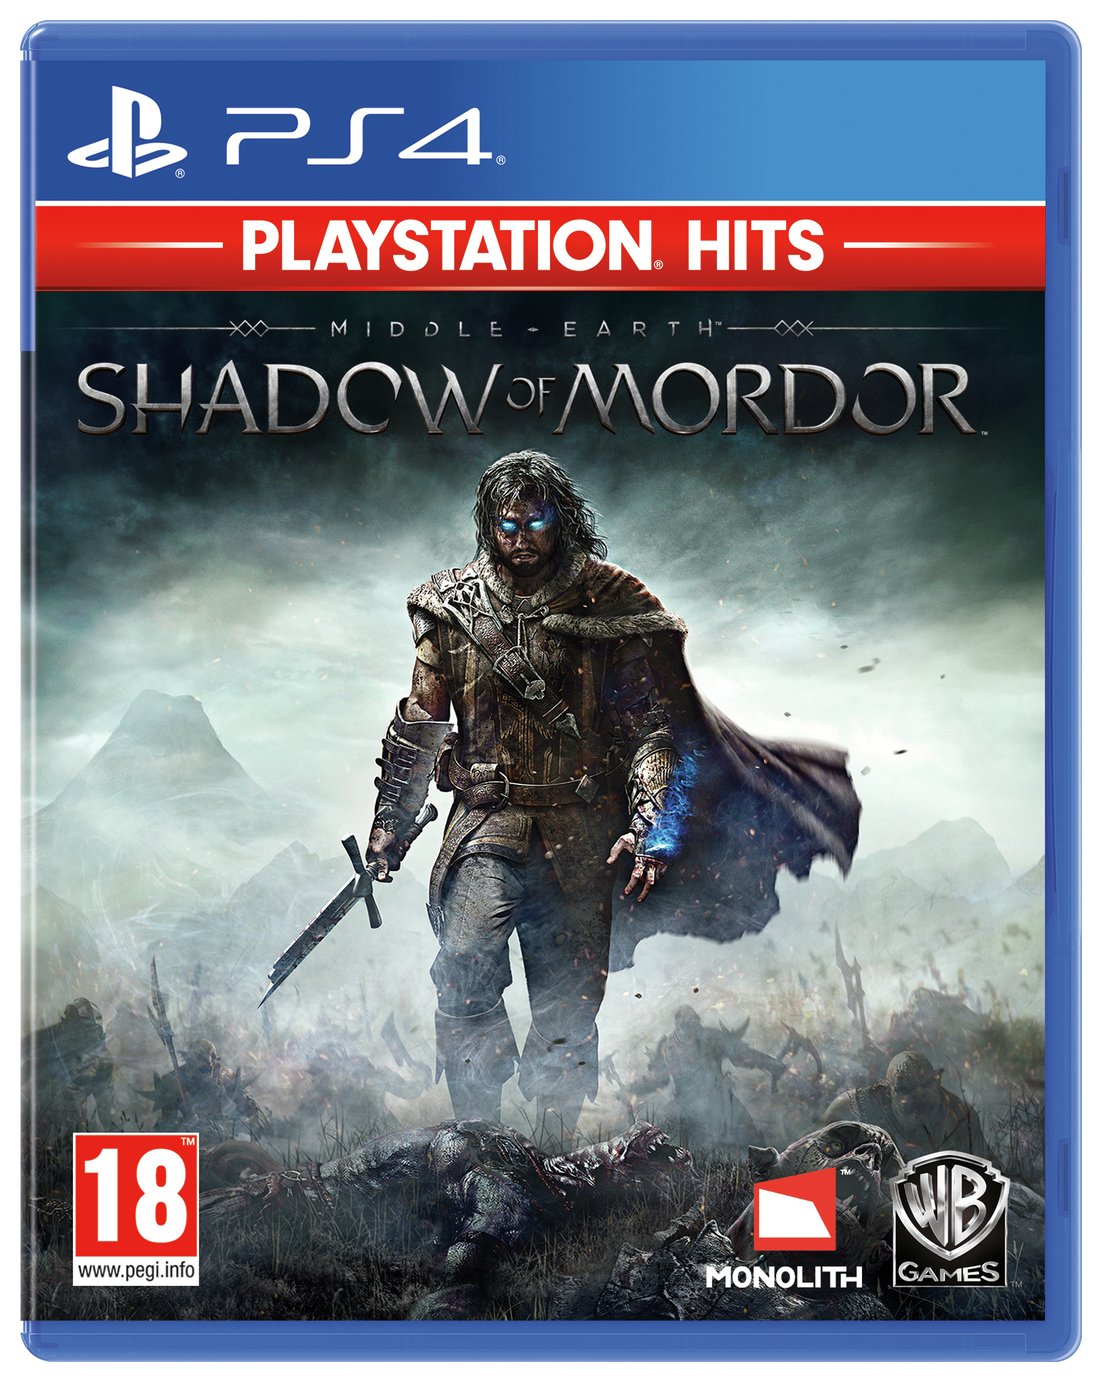 Middle Earth: Shadow of Mordor PS4 Hits Game review